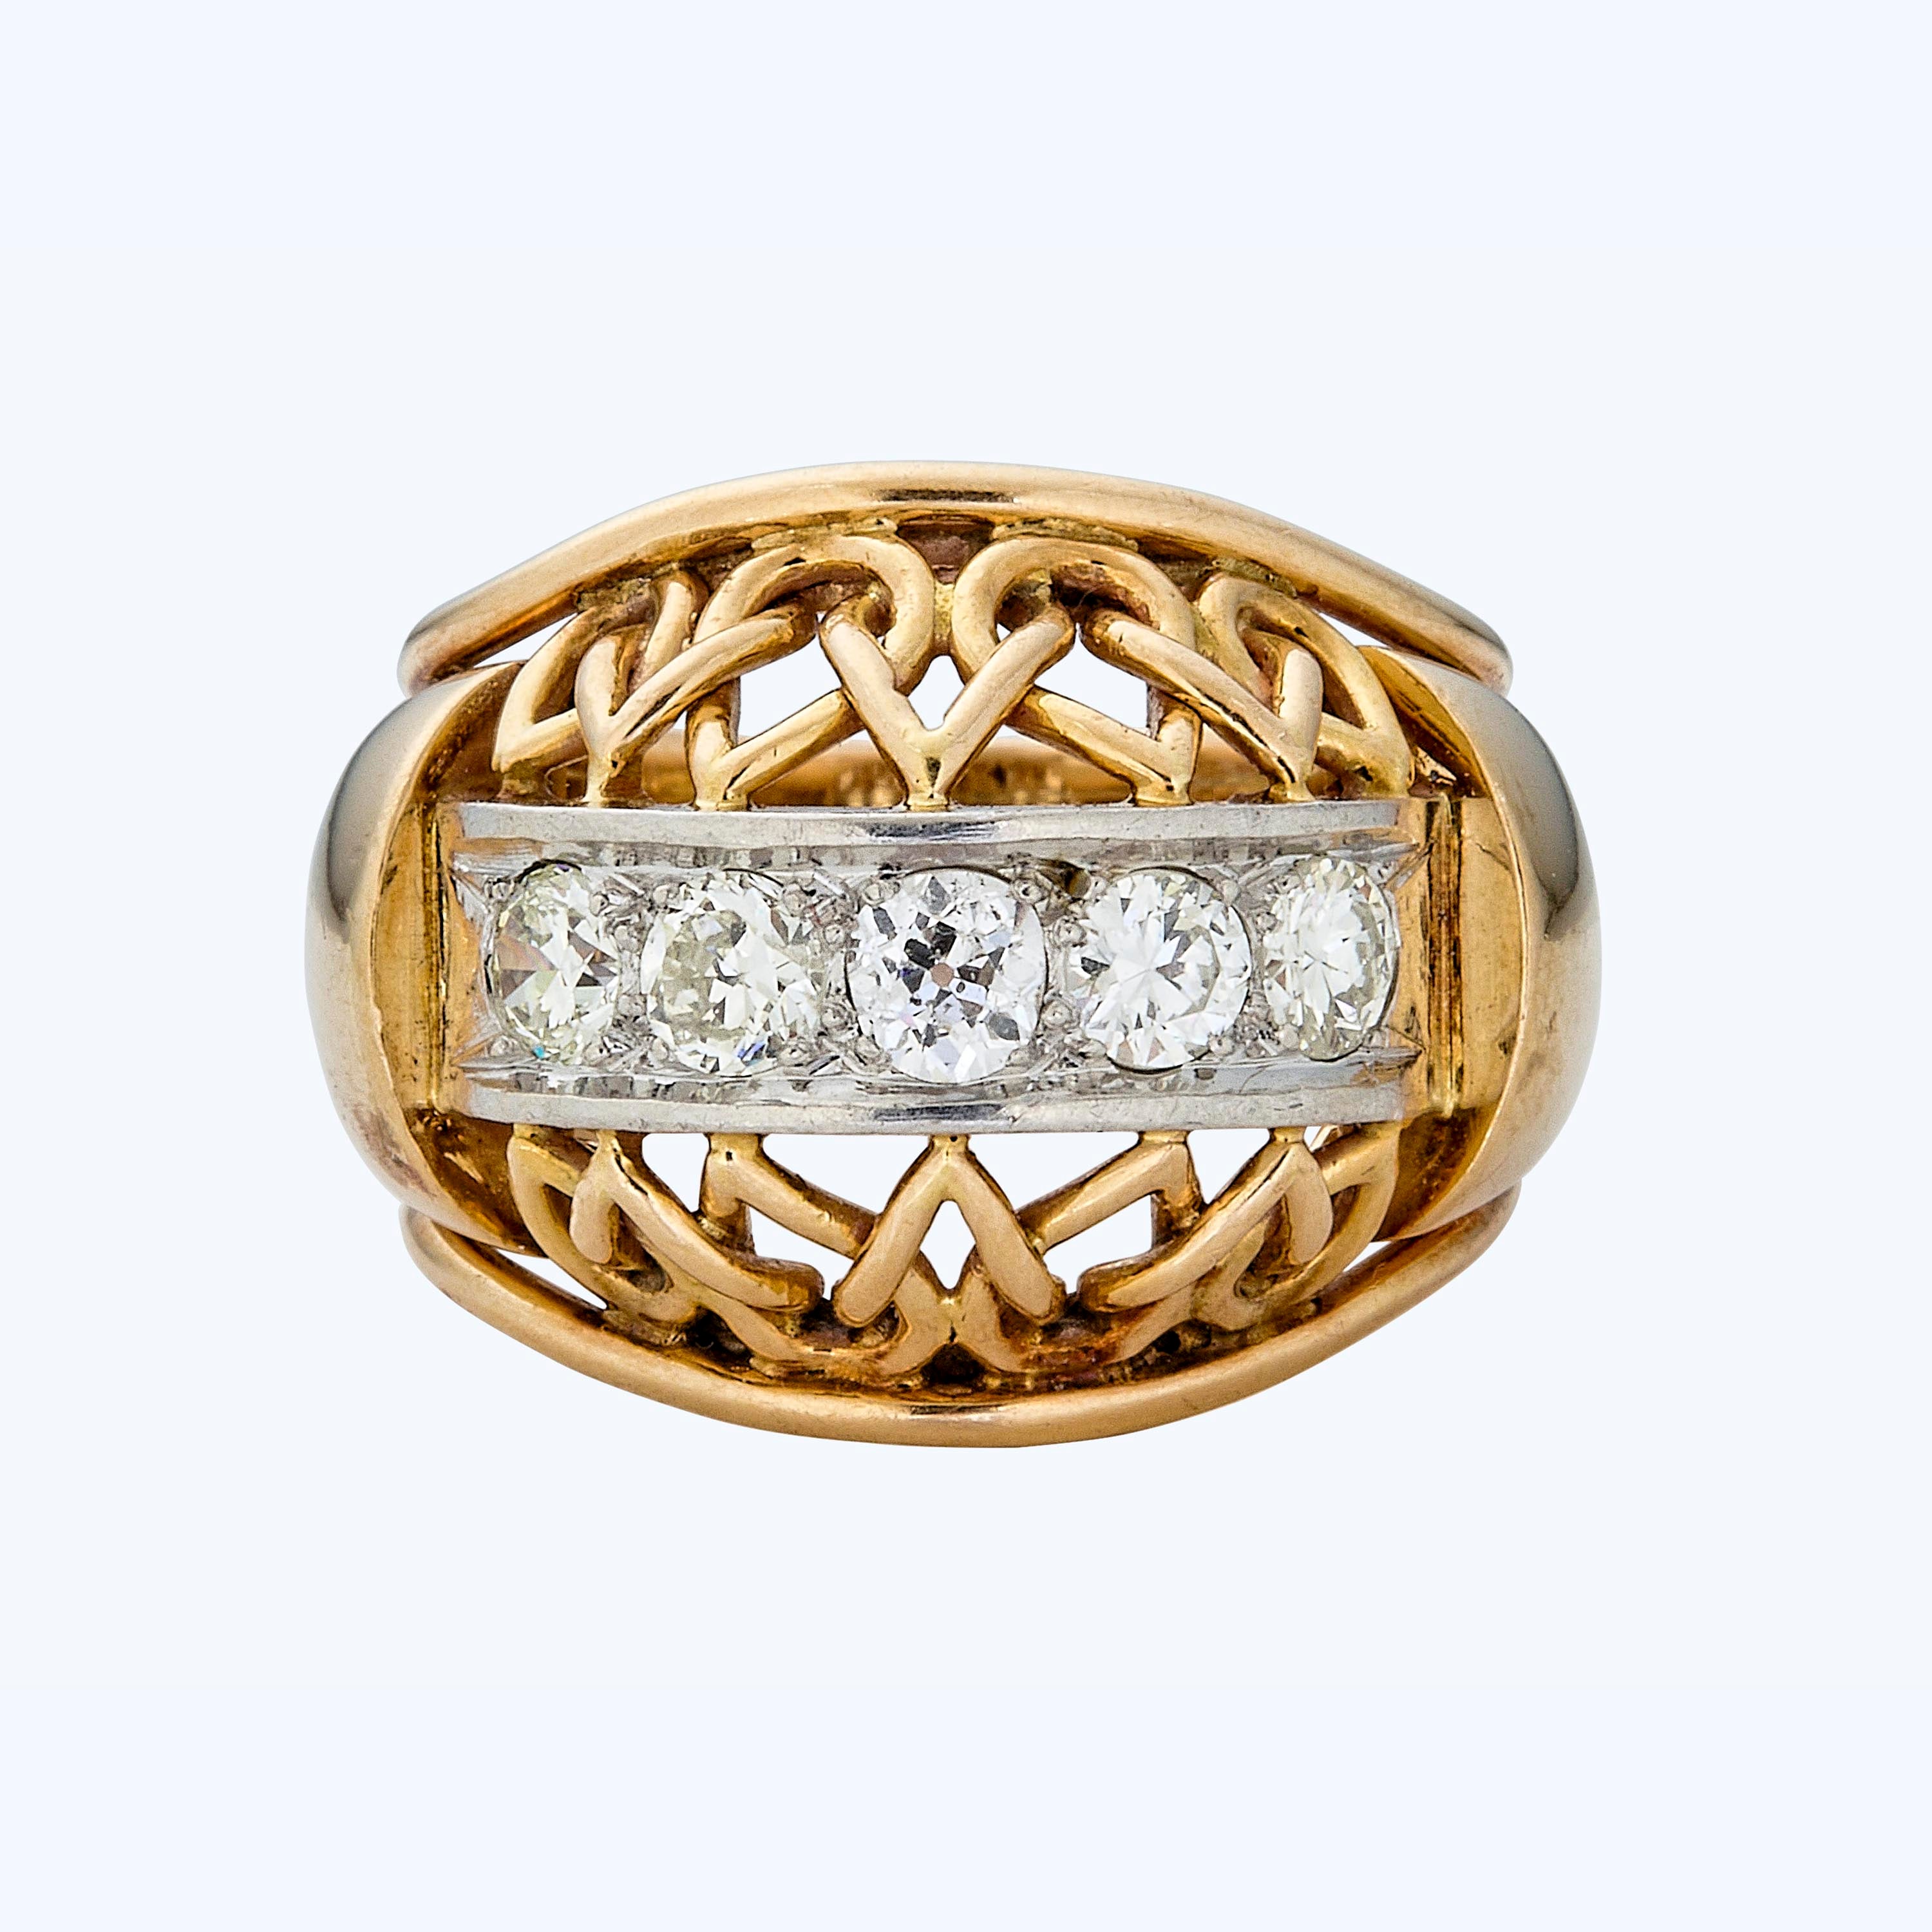 1950s French gold and diamond filigree ring